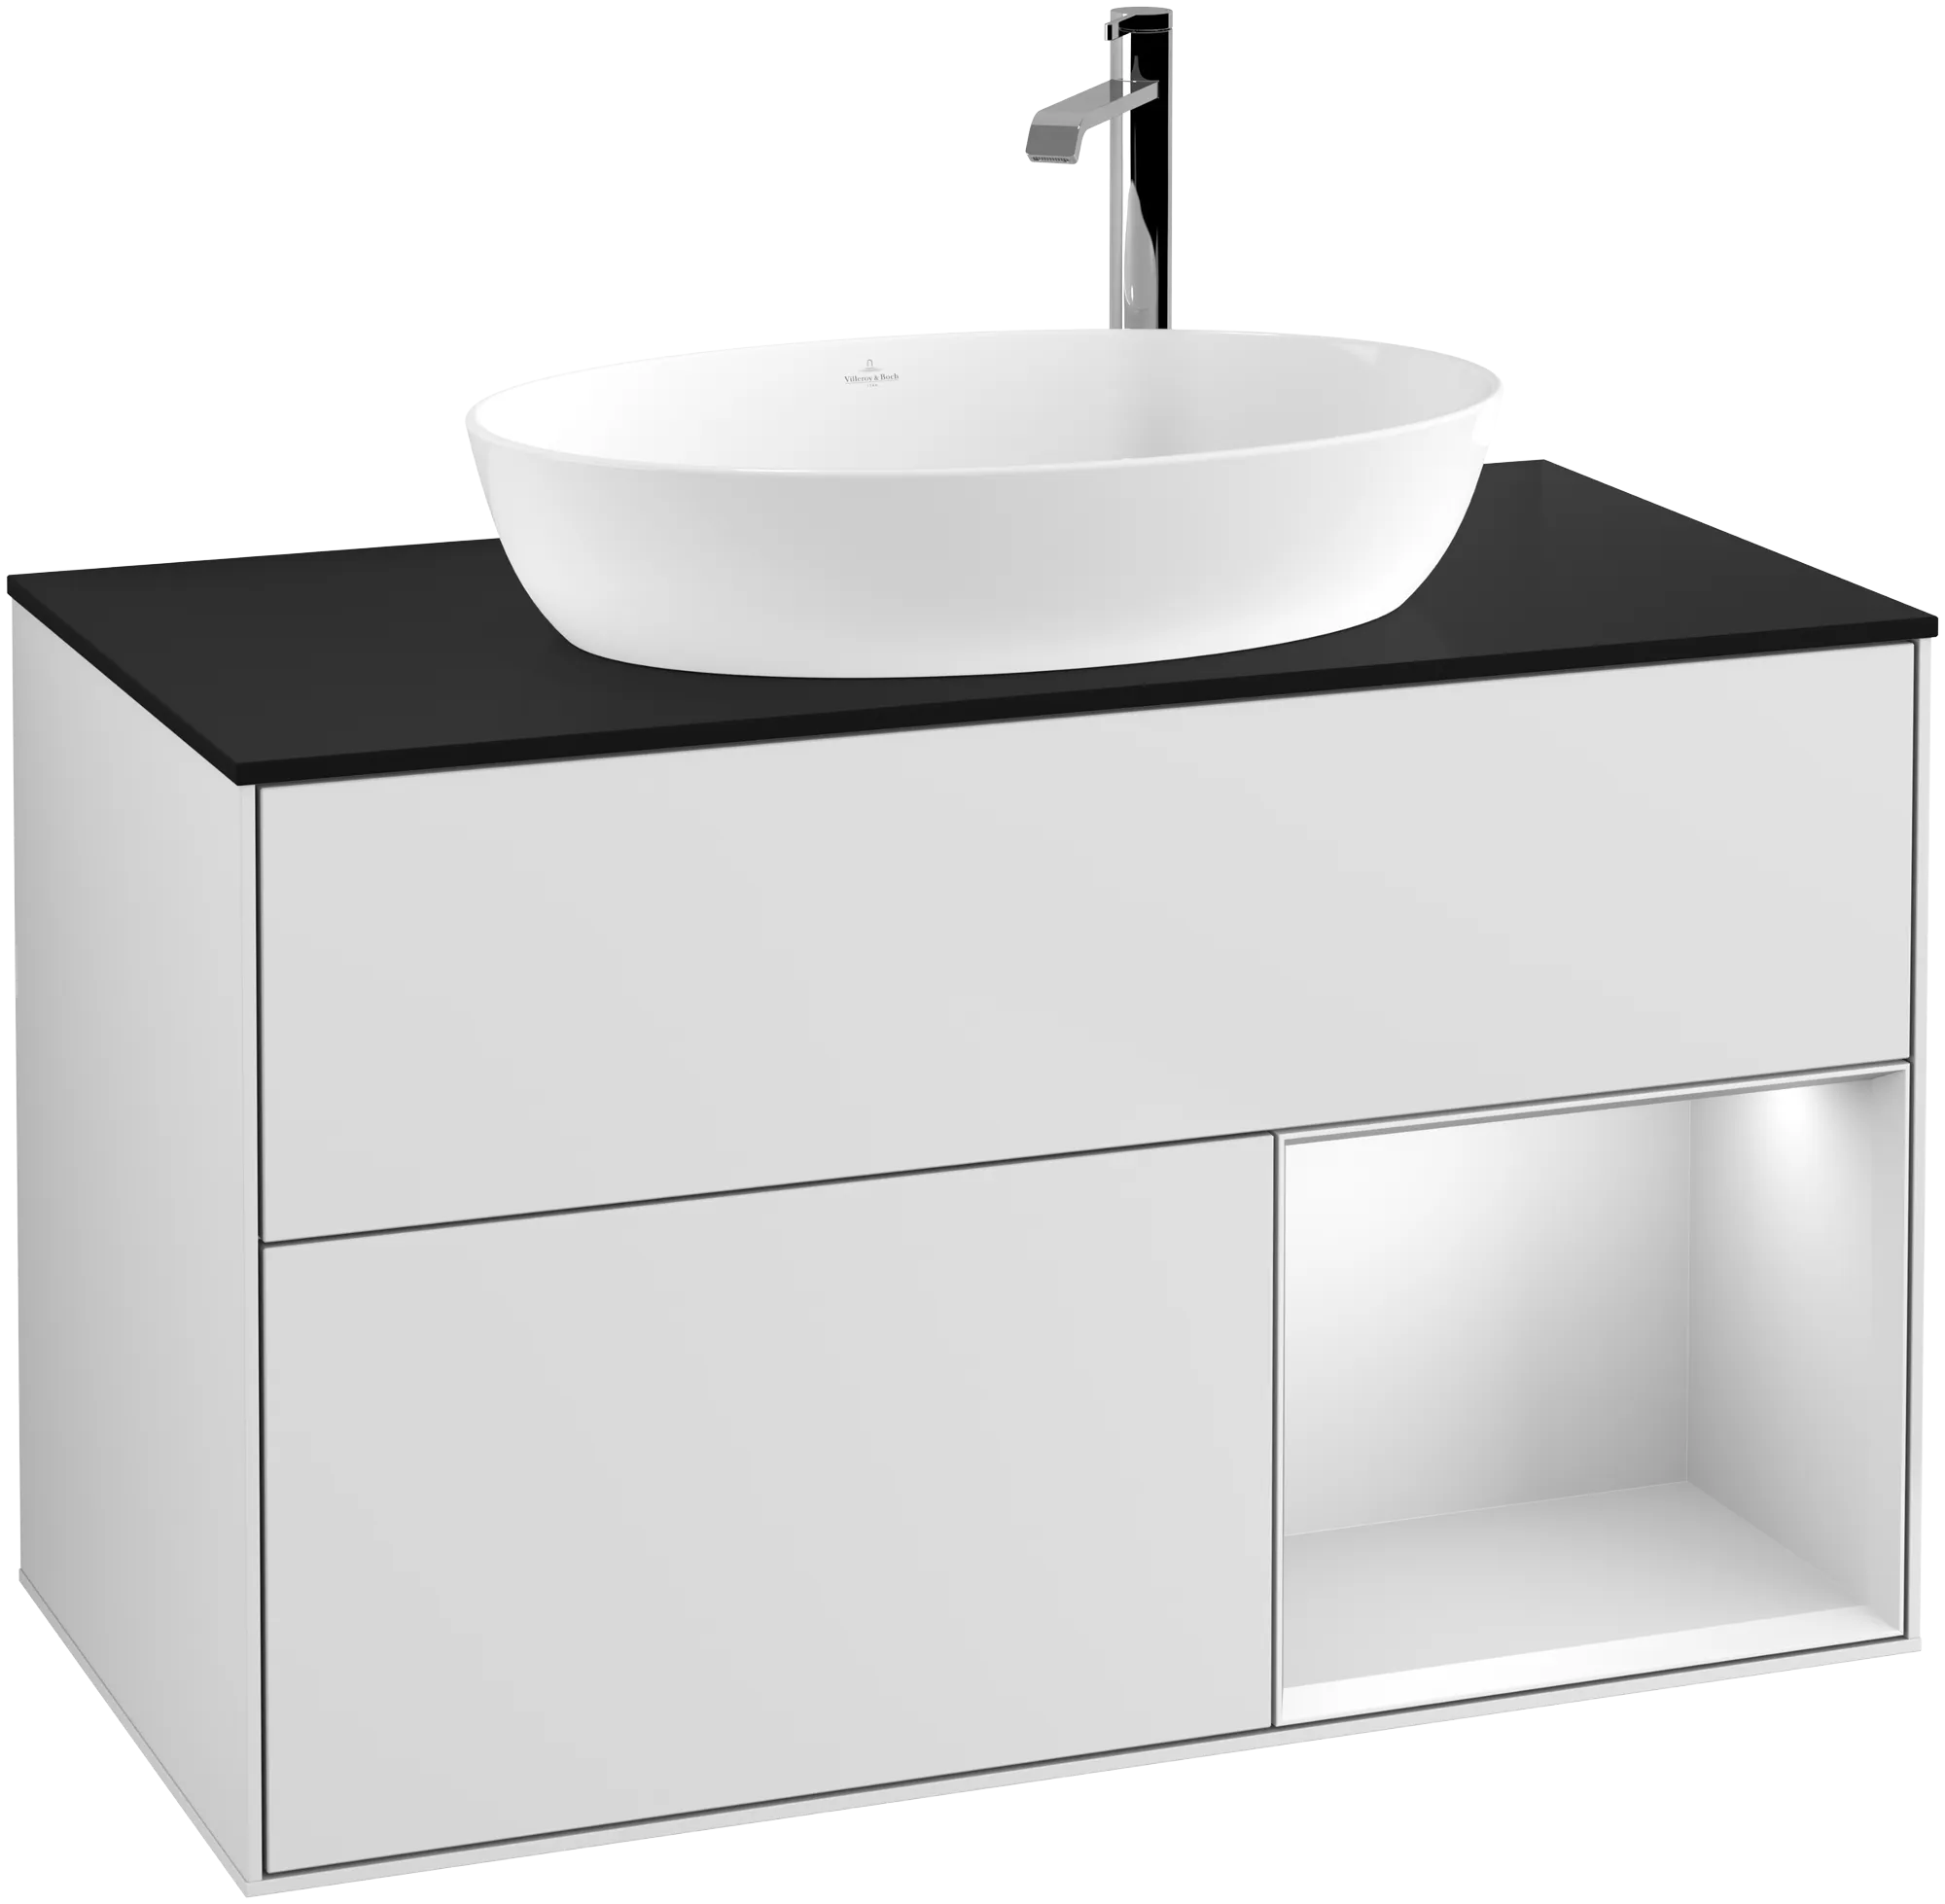 VILLEROY BOCH Finion Vanity unit, with lighting, 2 pull-out compartments, 1000 x 603 x 501 mm, White Matt Lacquer / White Matt Lacquer / Glass Black Matt #G902MTMT resmi